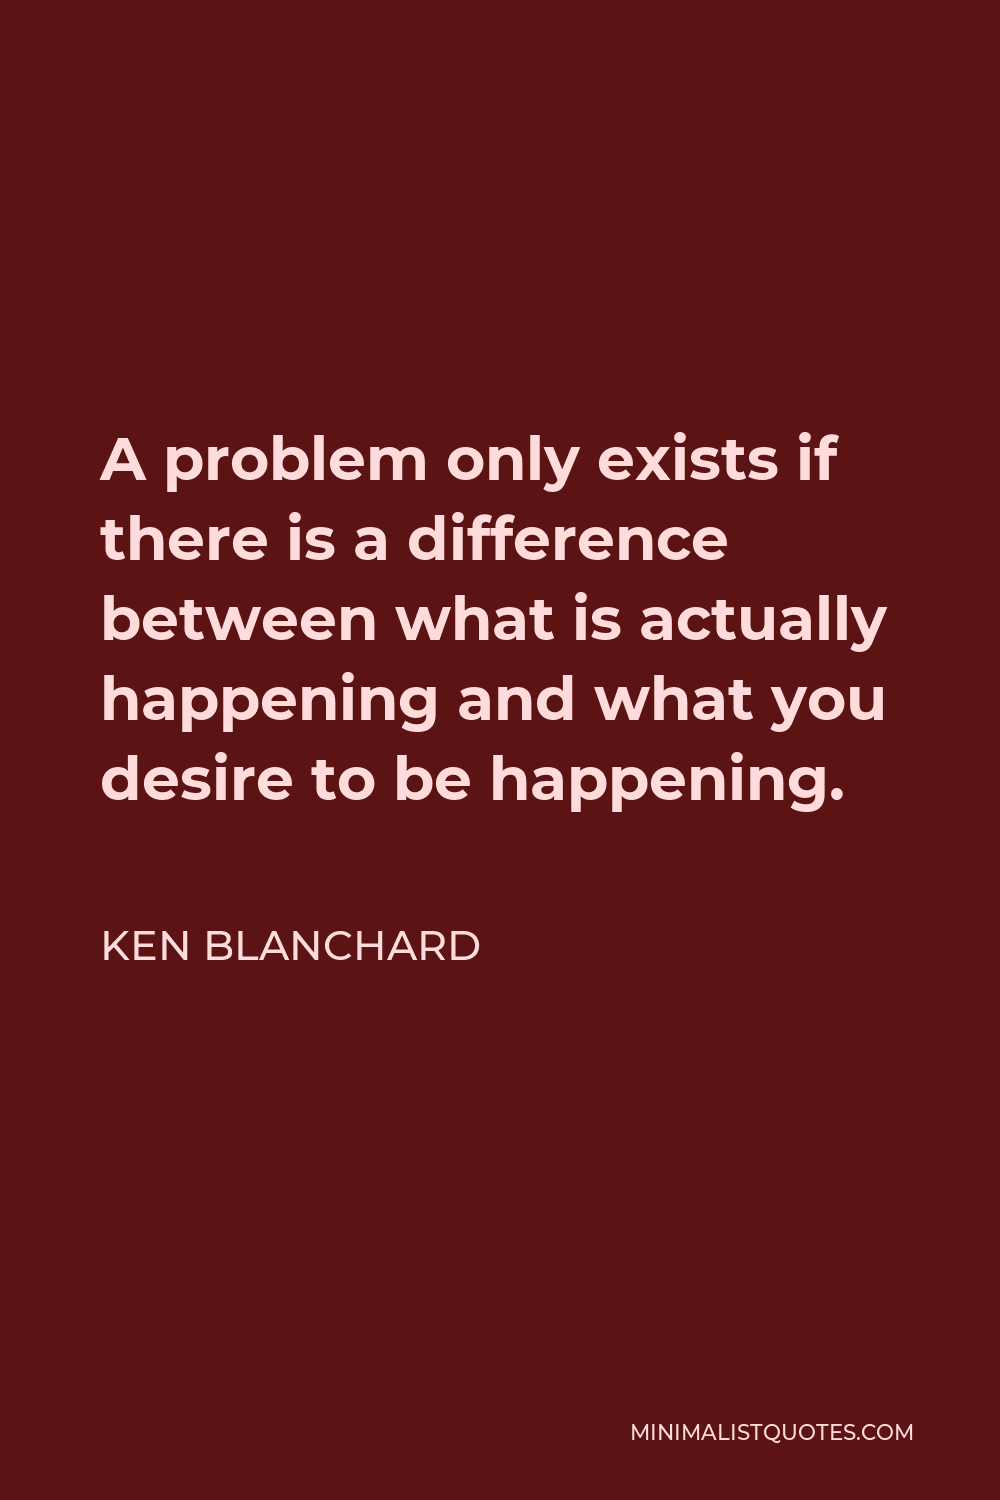 Ken Blanchard Quote - A problem only exists if there is a difference between what is actually happening and what you desire to be happening.